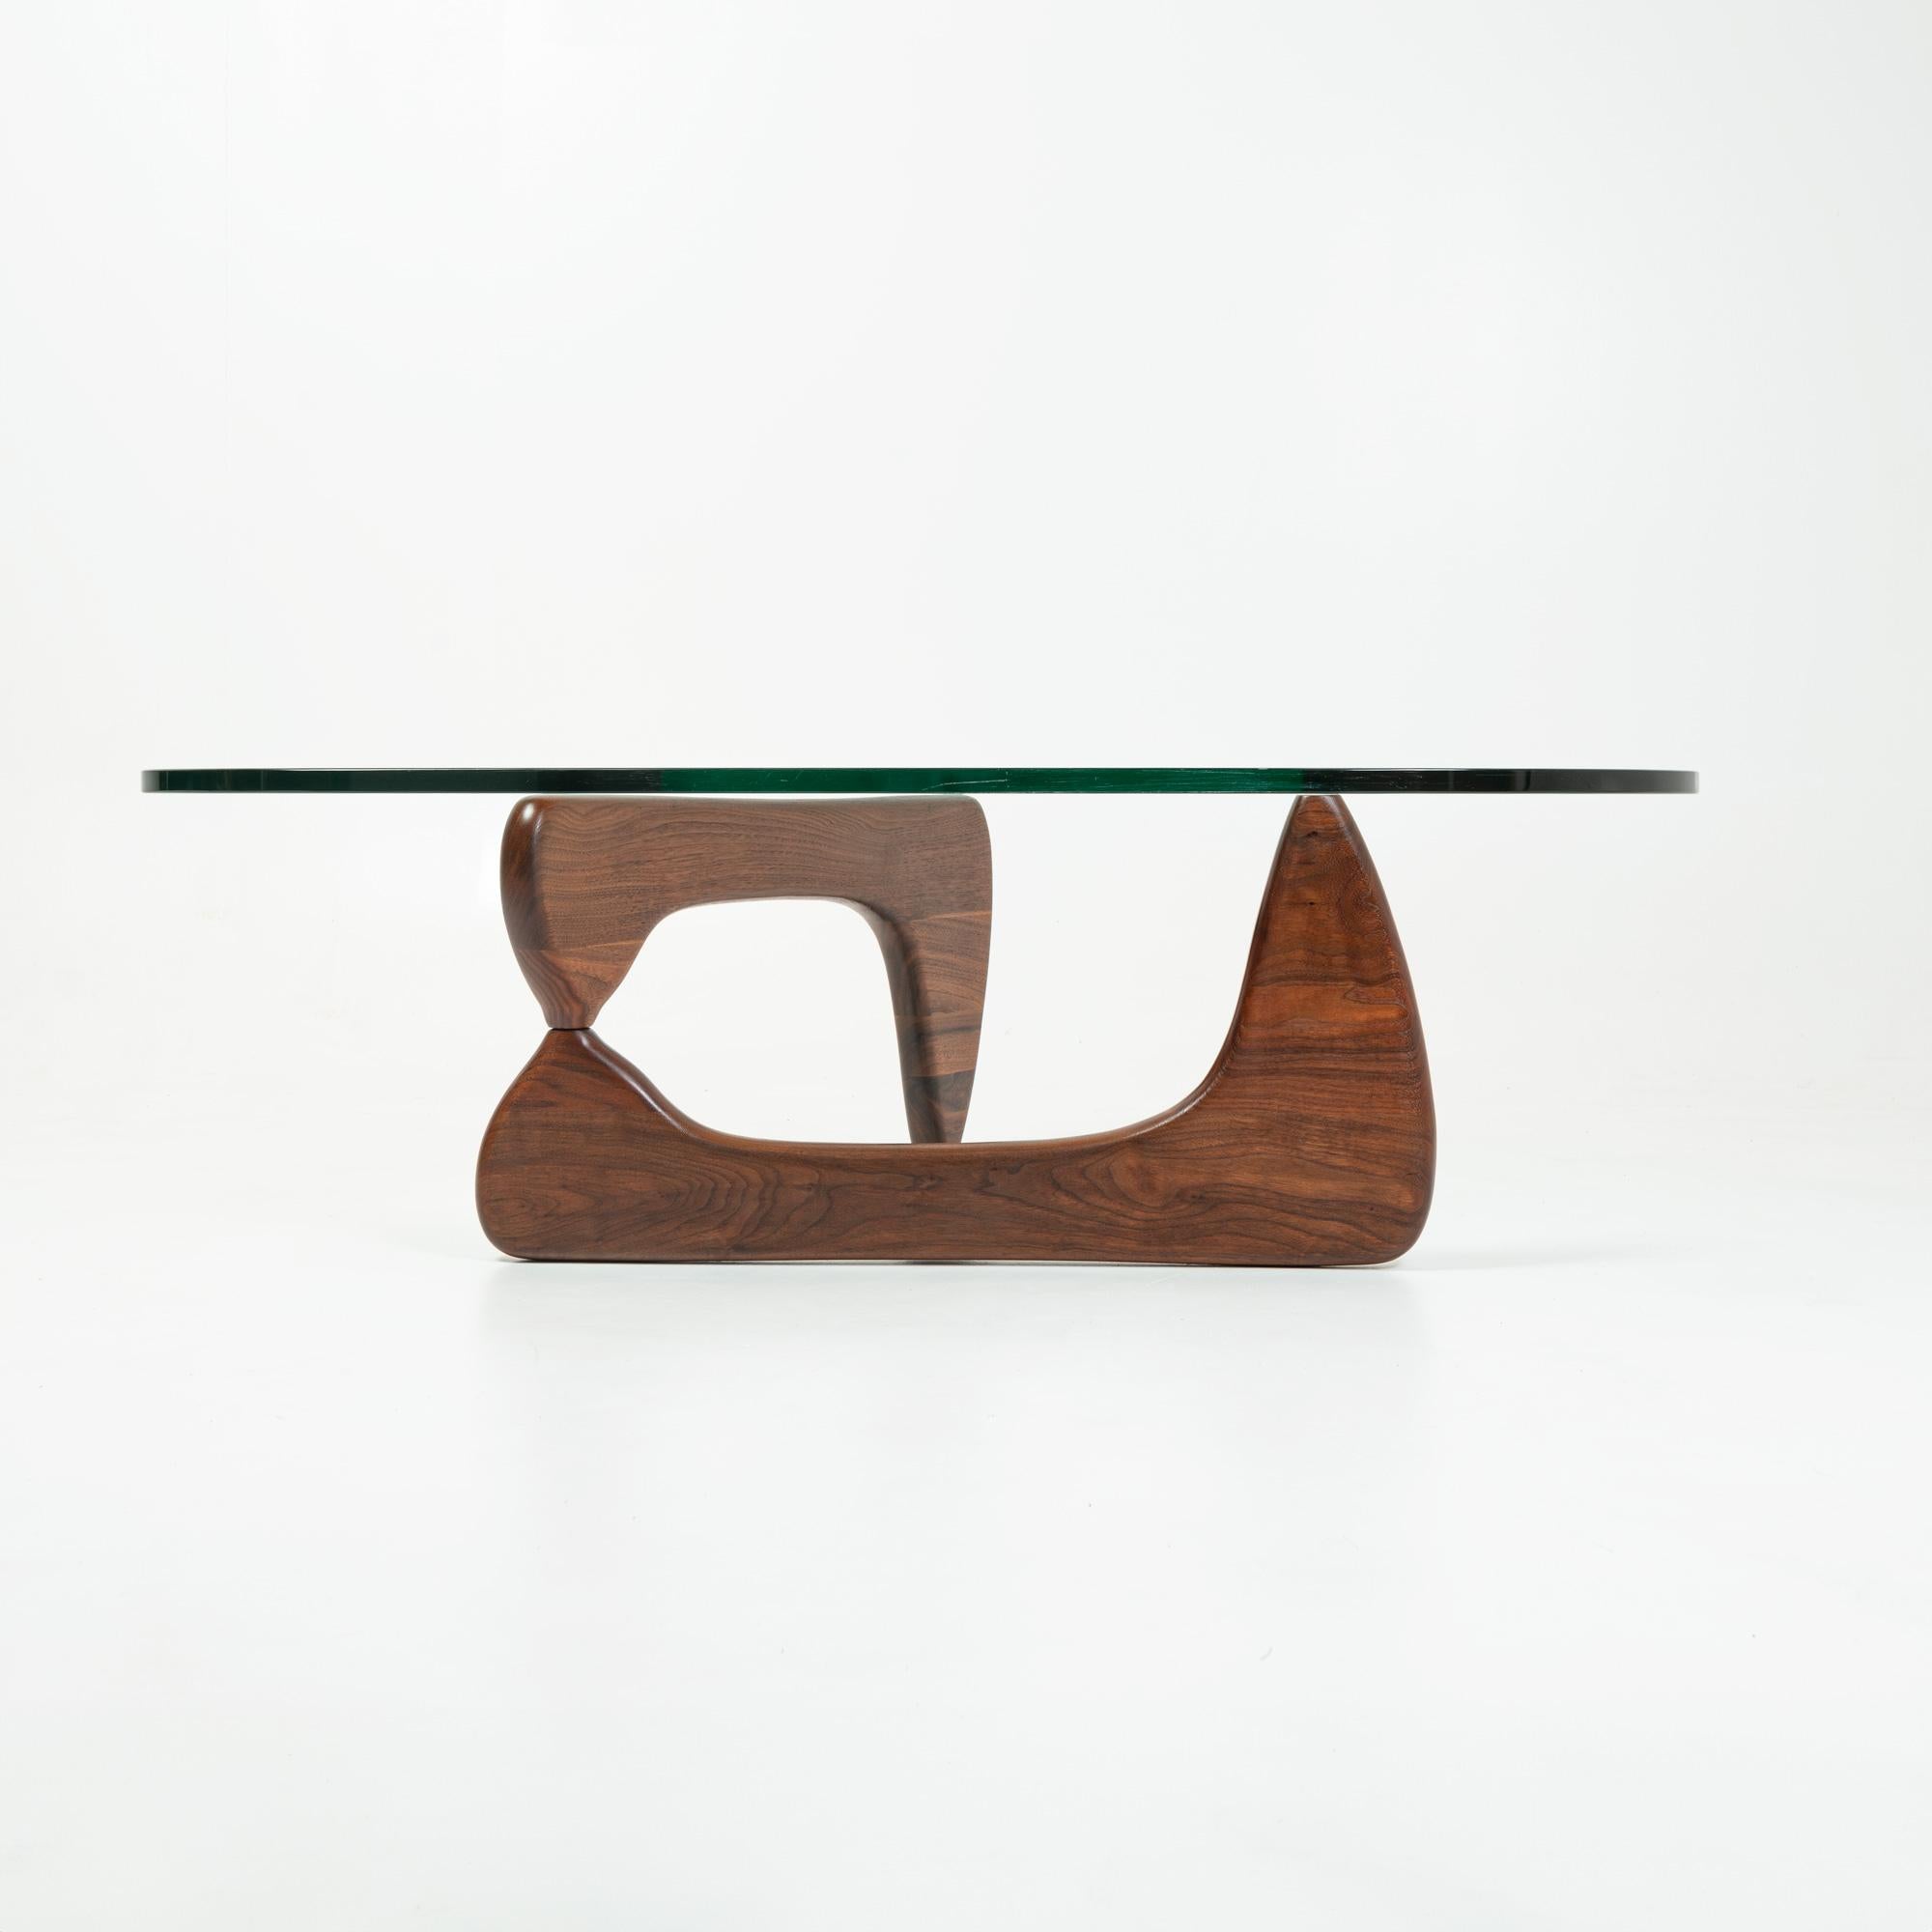 An early Noguchi IN50 coffee table with the original glass, originally purchased by first owner in 1970s. Walnut base with straight aluminum pin ( later pins has locking fins). Scratches on the glass, no chips.

Walnut base has been restored with